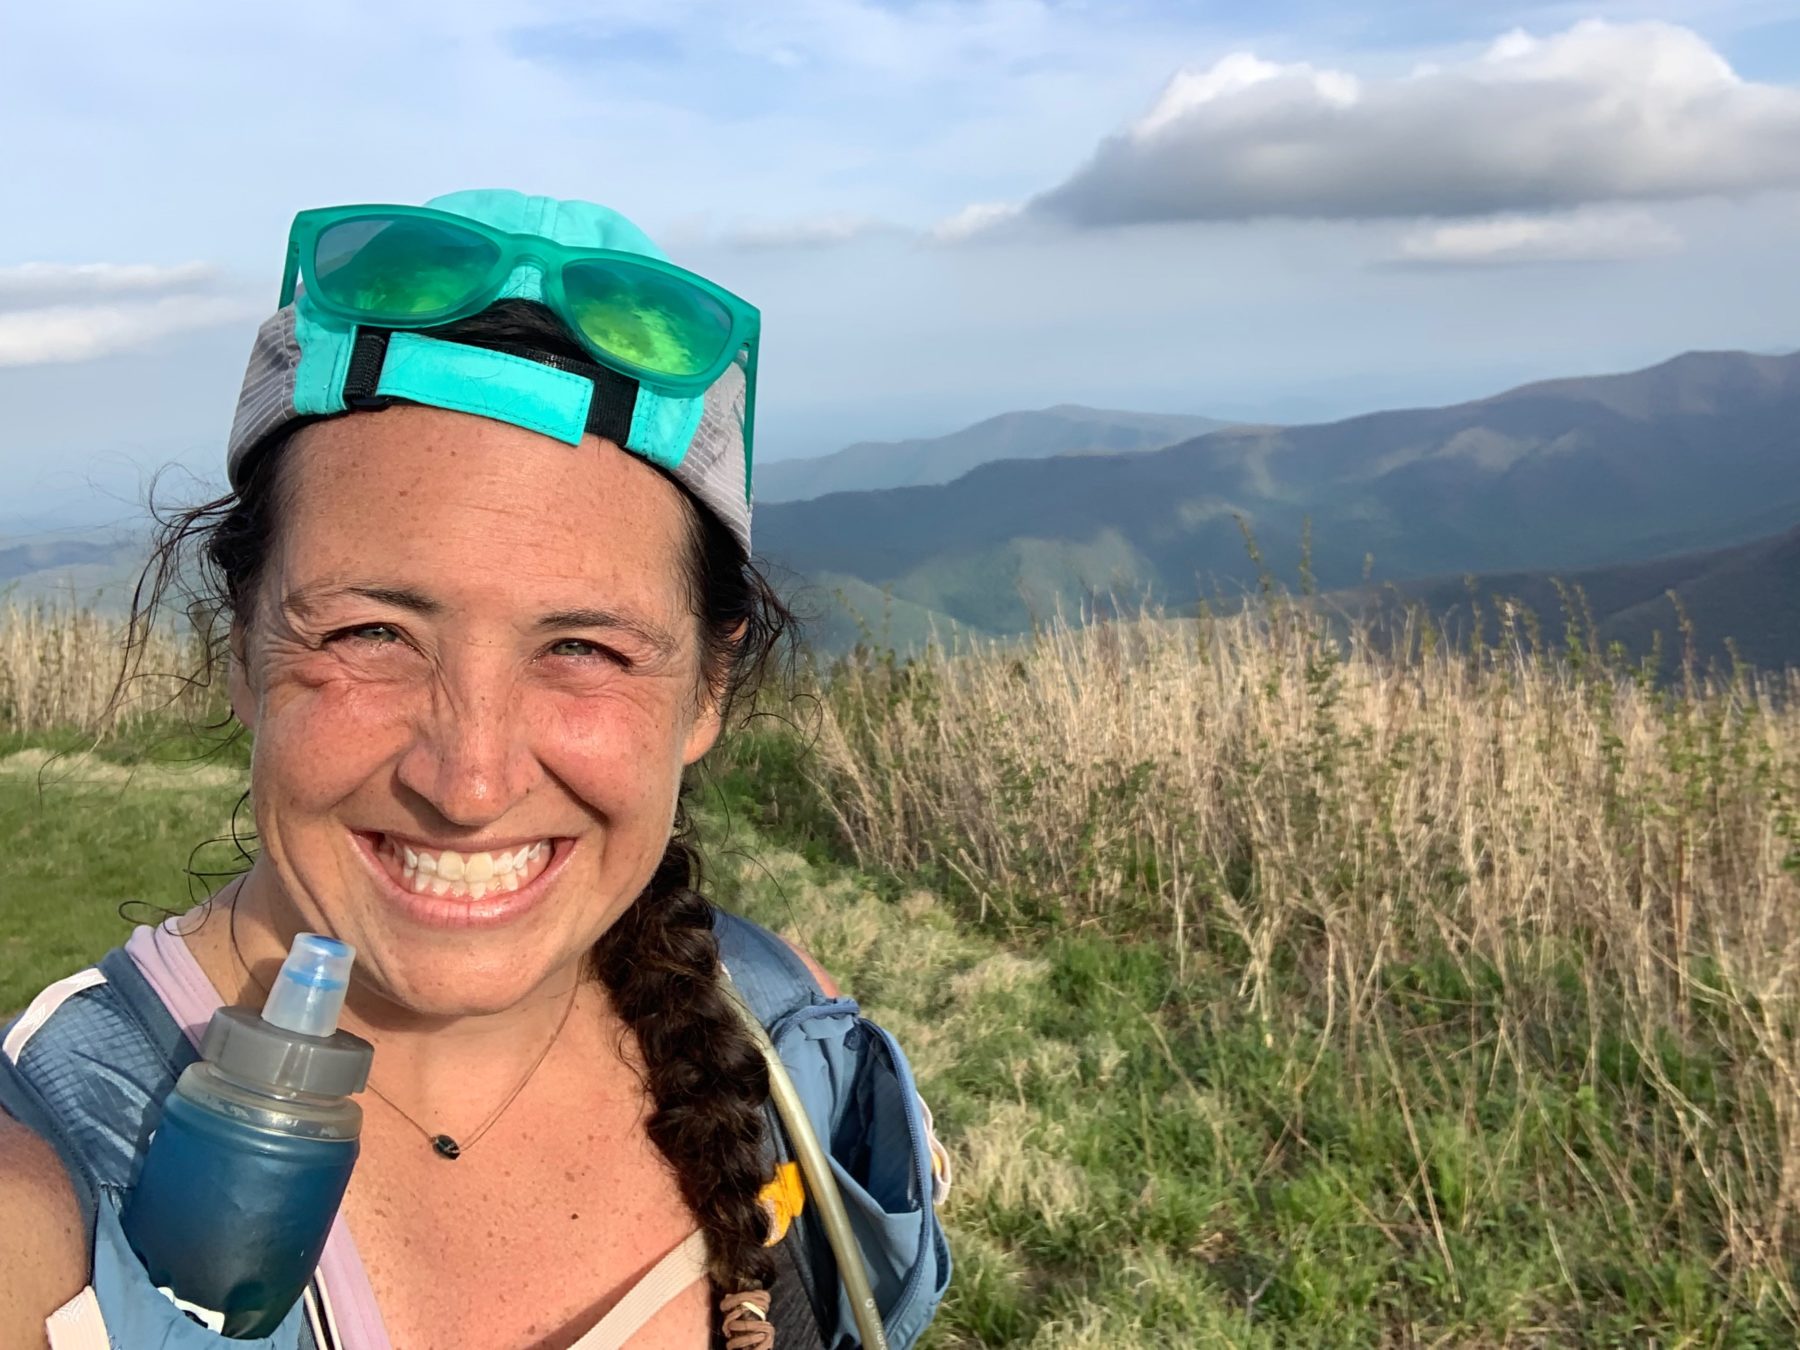 A woman smiles from on top of a mountain mid-trail run.